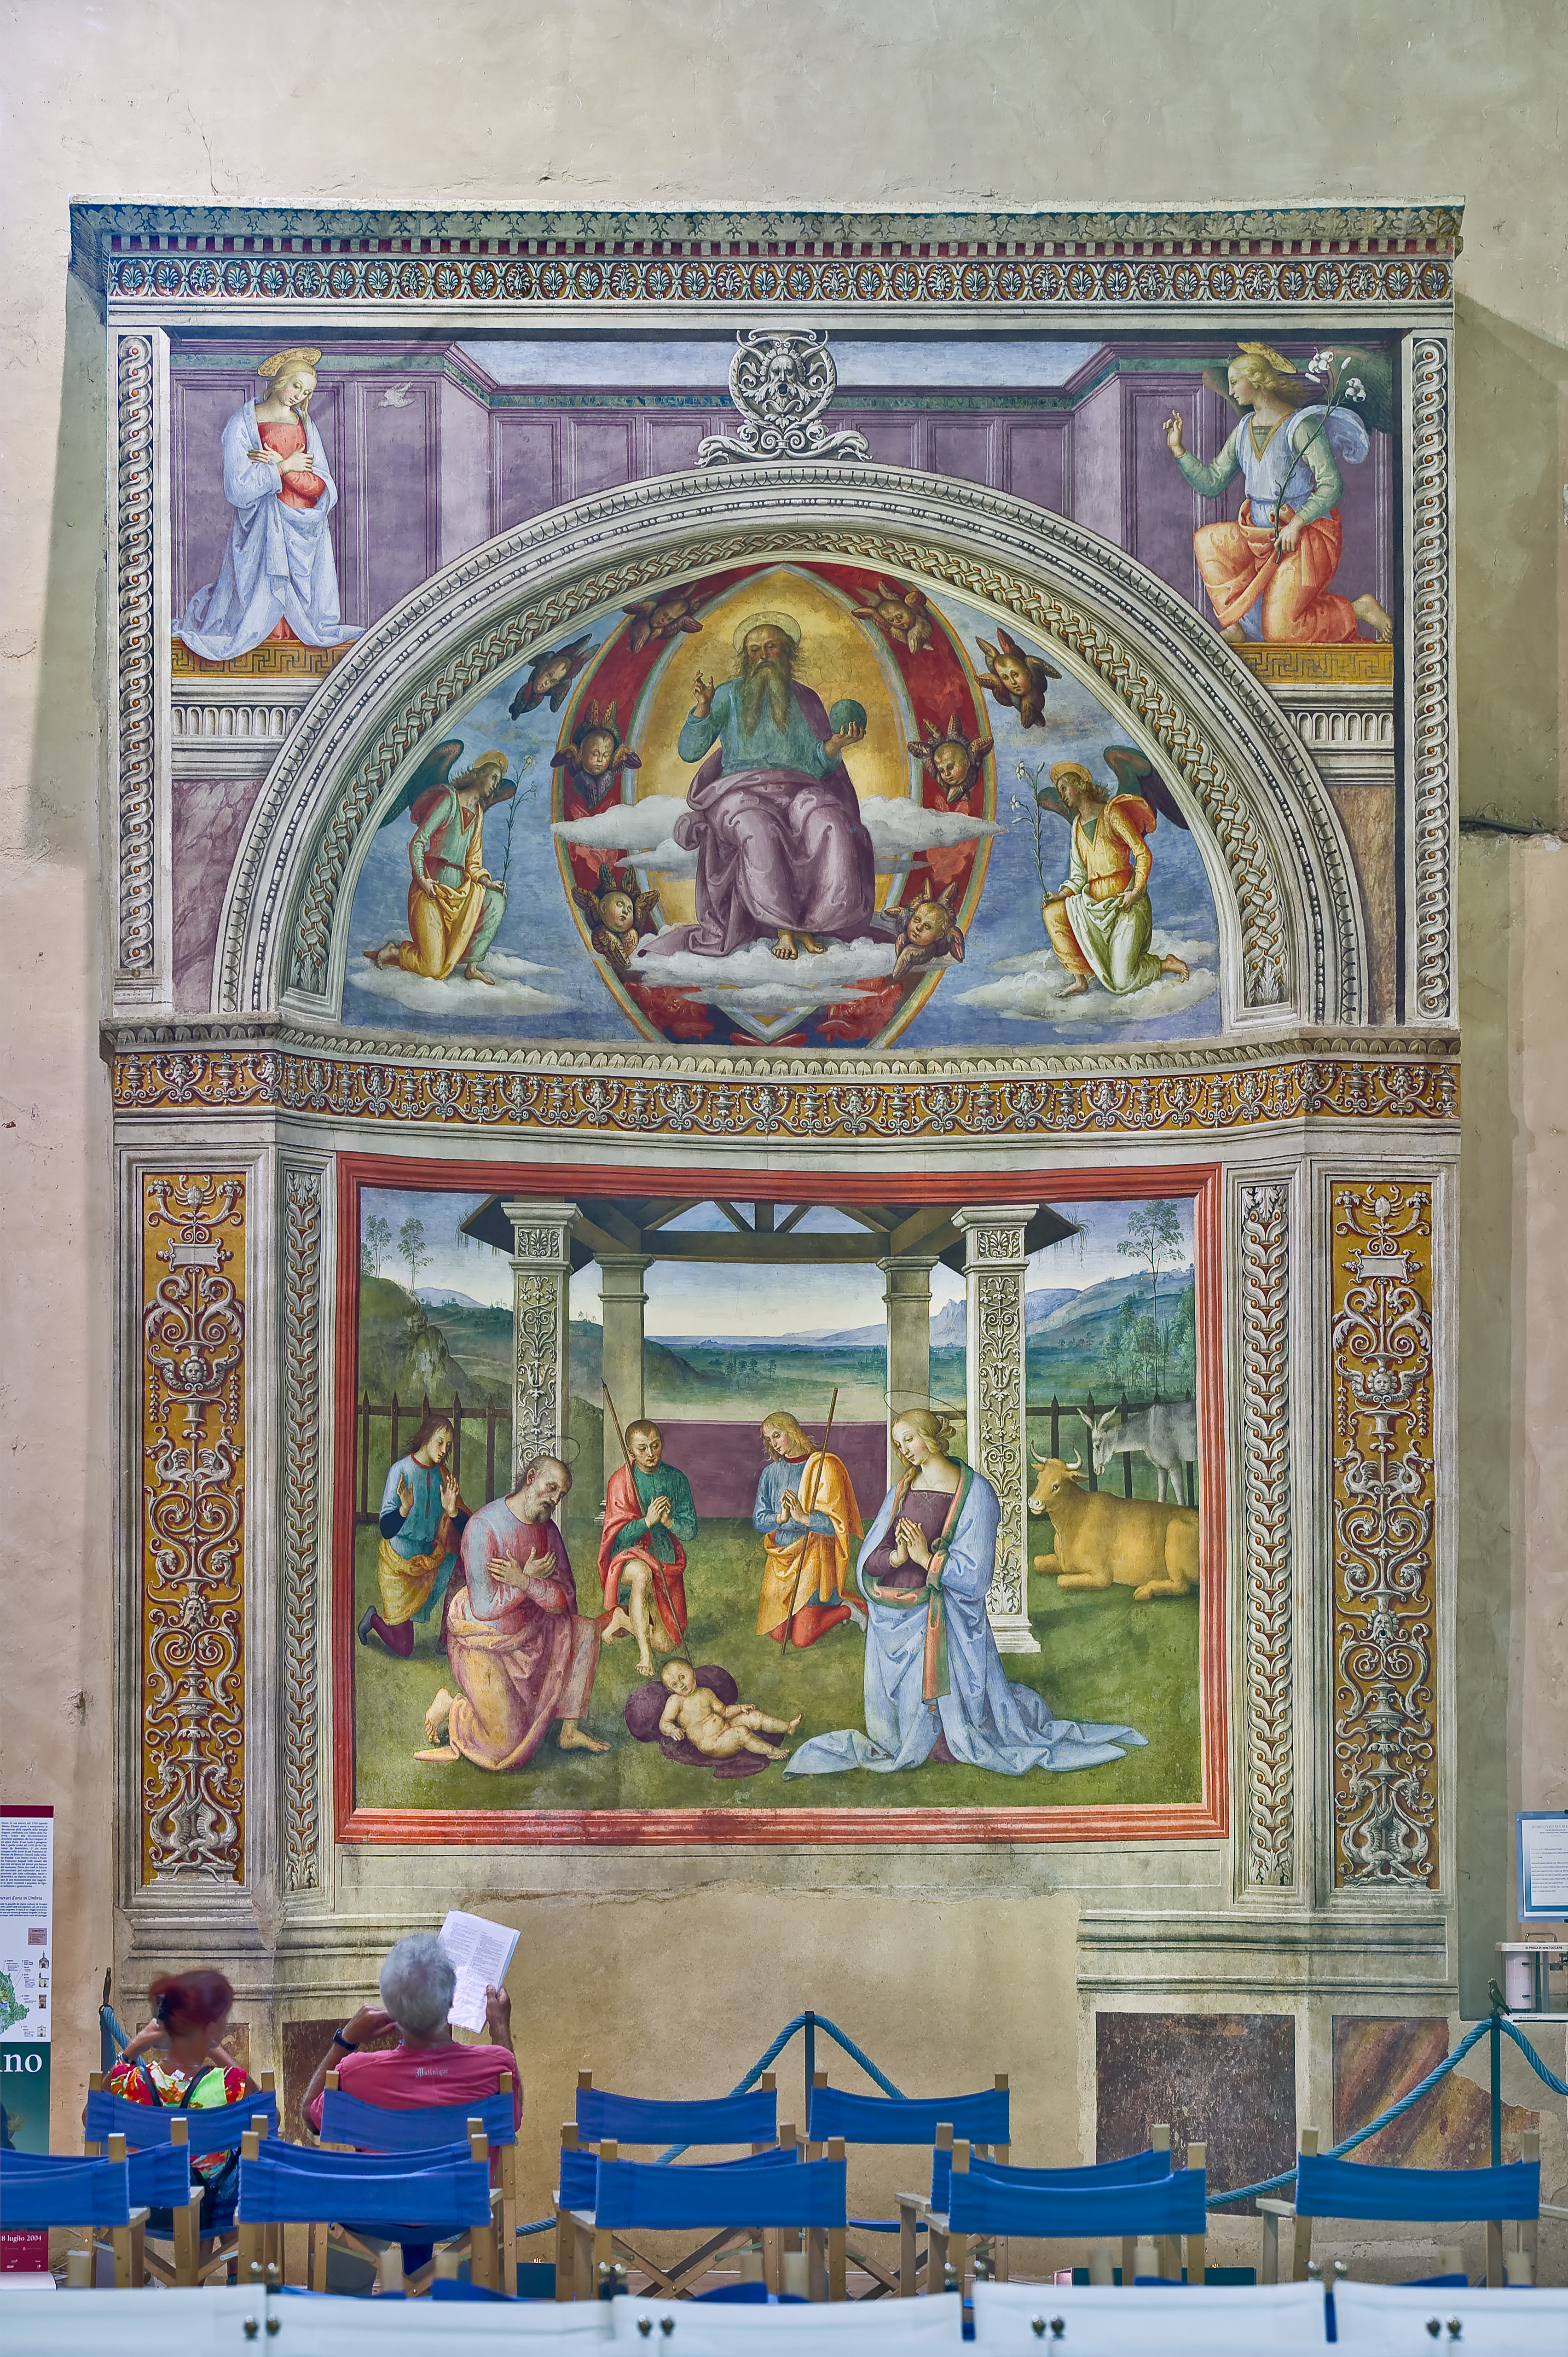 Montefalco, Museum of St. Francis, Church of St. Francis: "Nativity with the Annunciation and the Eternal among angels and cherubs", by Pietro Vannucci known as  Perugino, 1503. Fresco. From the top, "Annunciation", "The blessing Eternal between cherubs and two kneeling angels", "Nativity". Works admired by two tourists.